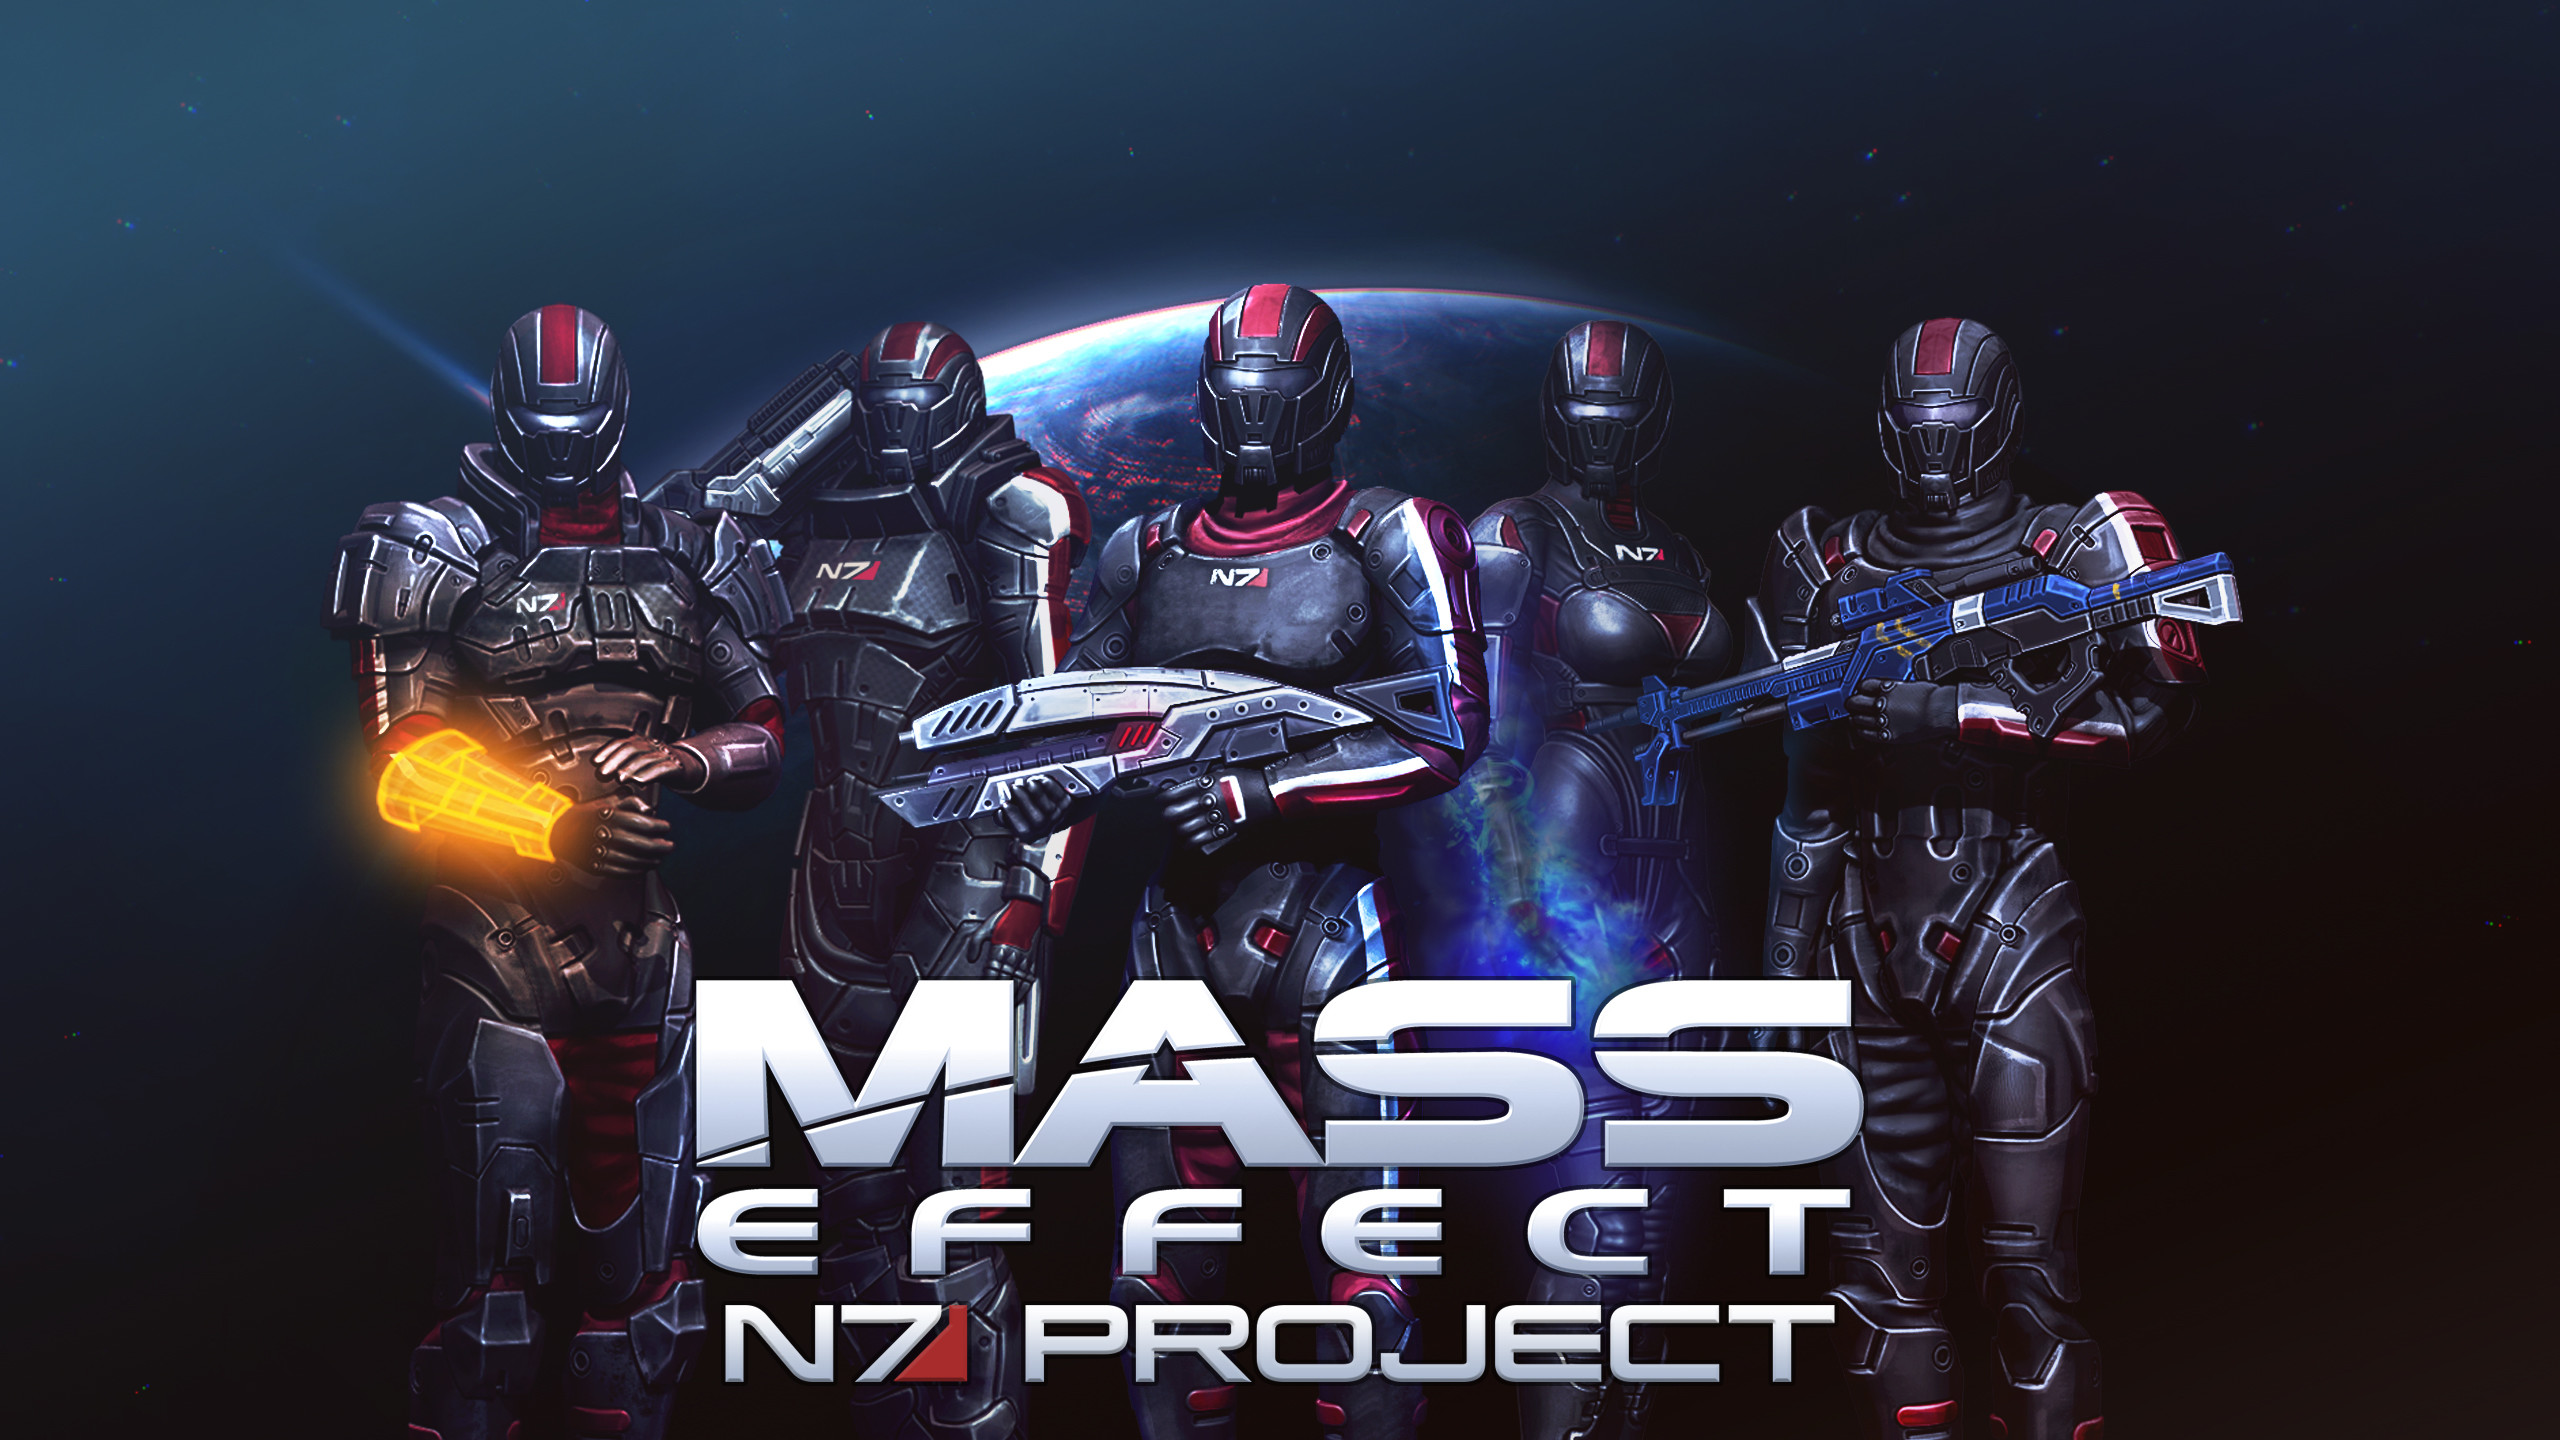 2560x1440 Mass Effect: N7 Project - game in the genre Action RPG, which tells the  story of a small team of soldiers N7 during the events that occur in  parallel with ...